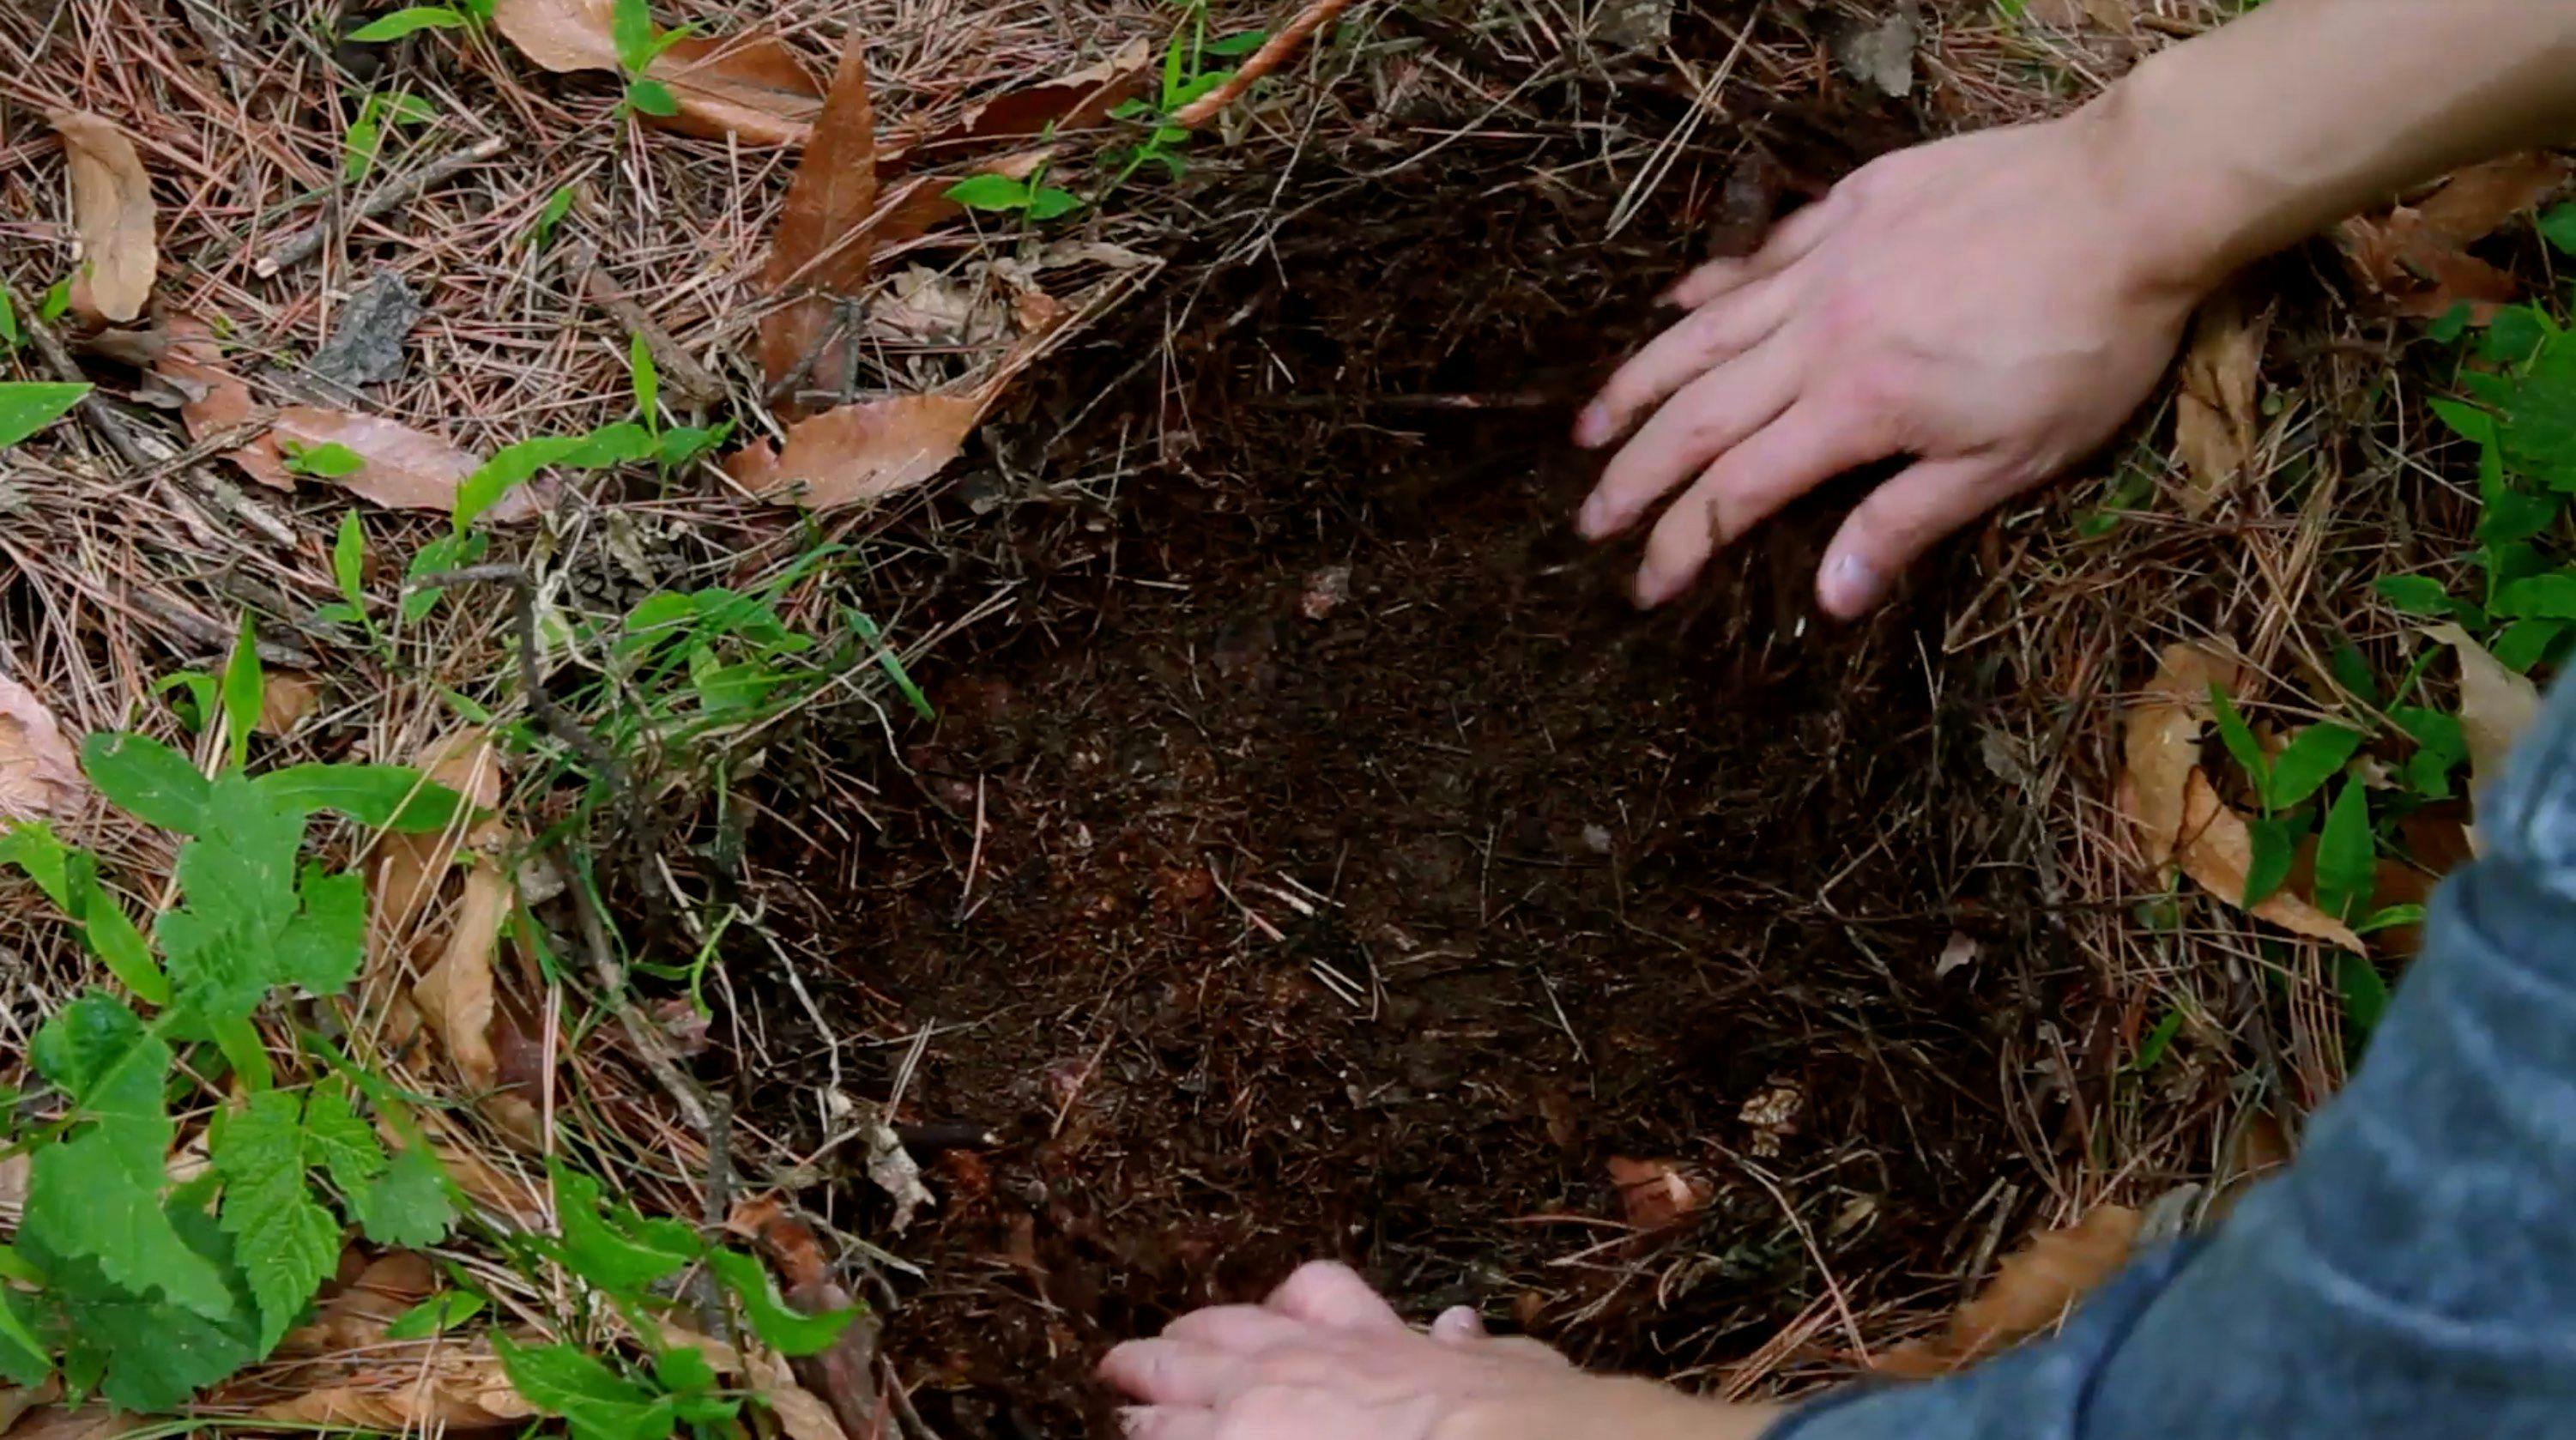 two hands dig a hole in the earth. There are leaves on the ground.